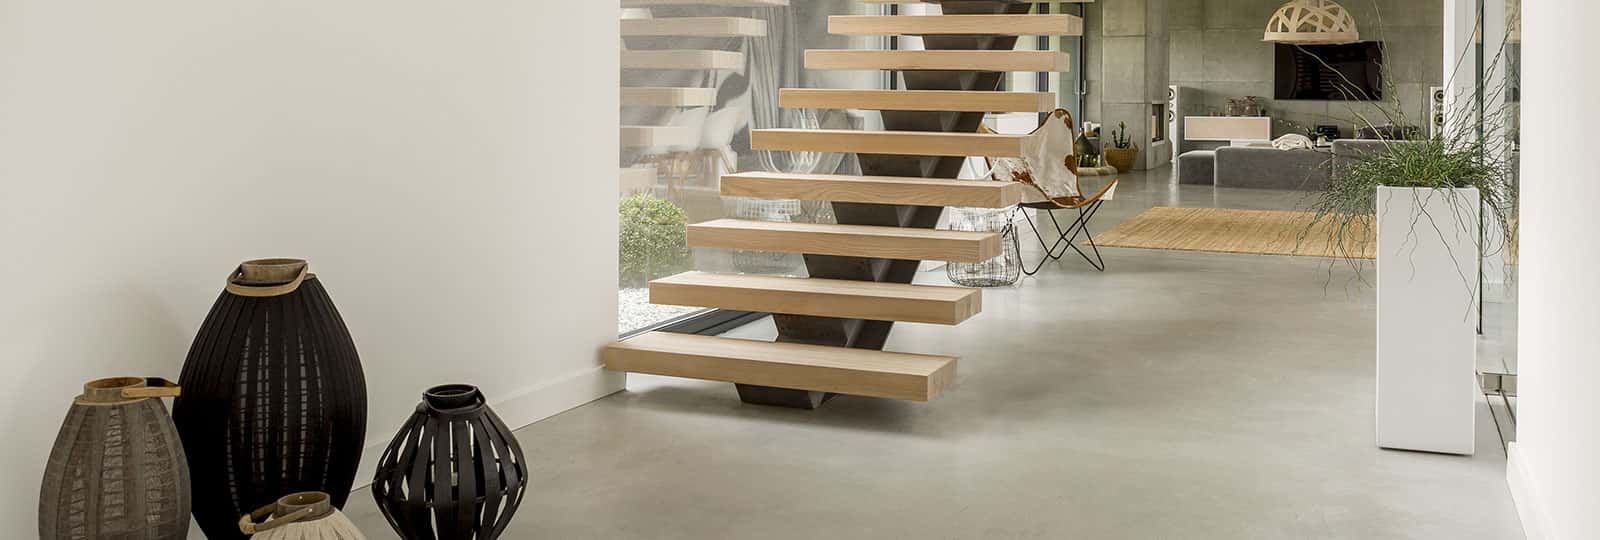 floating stair design